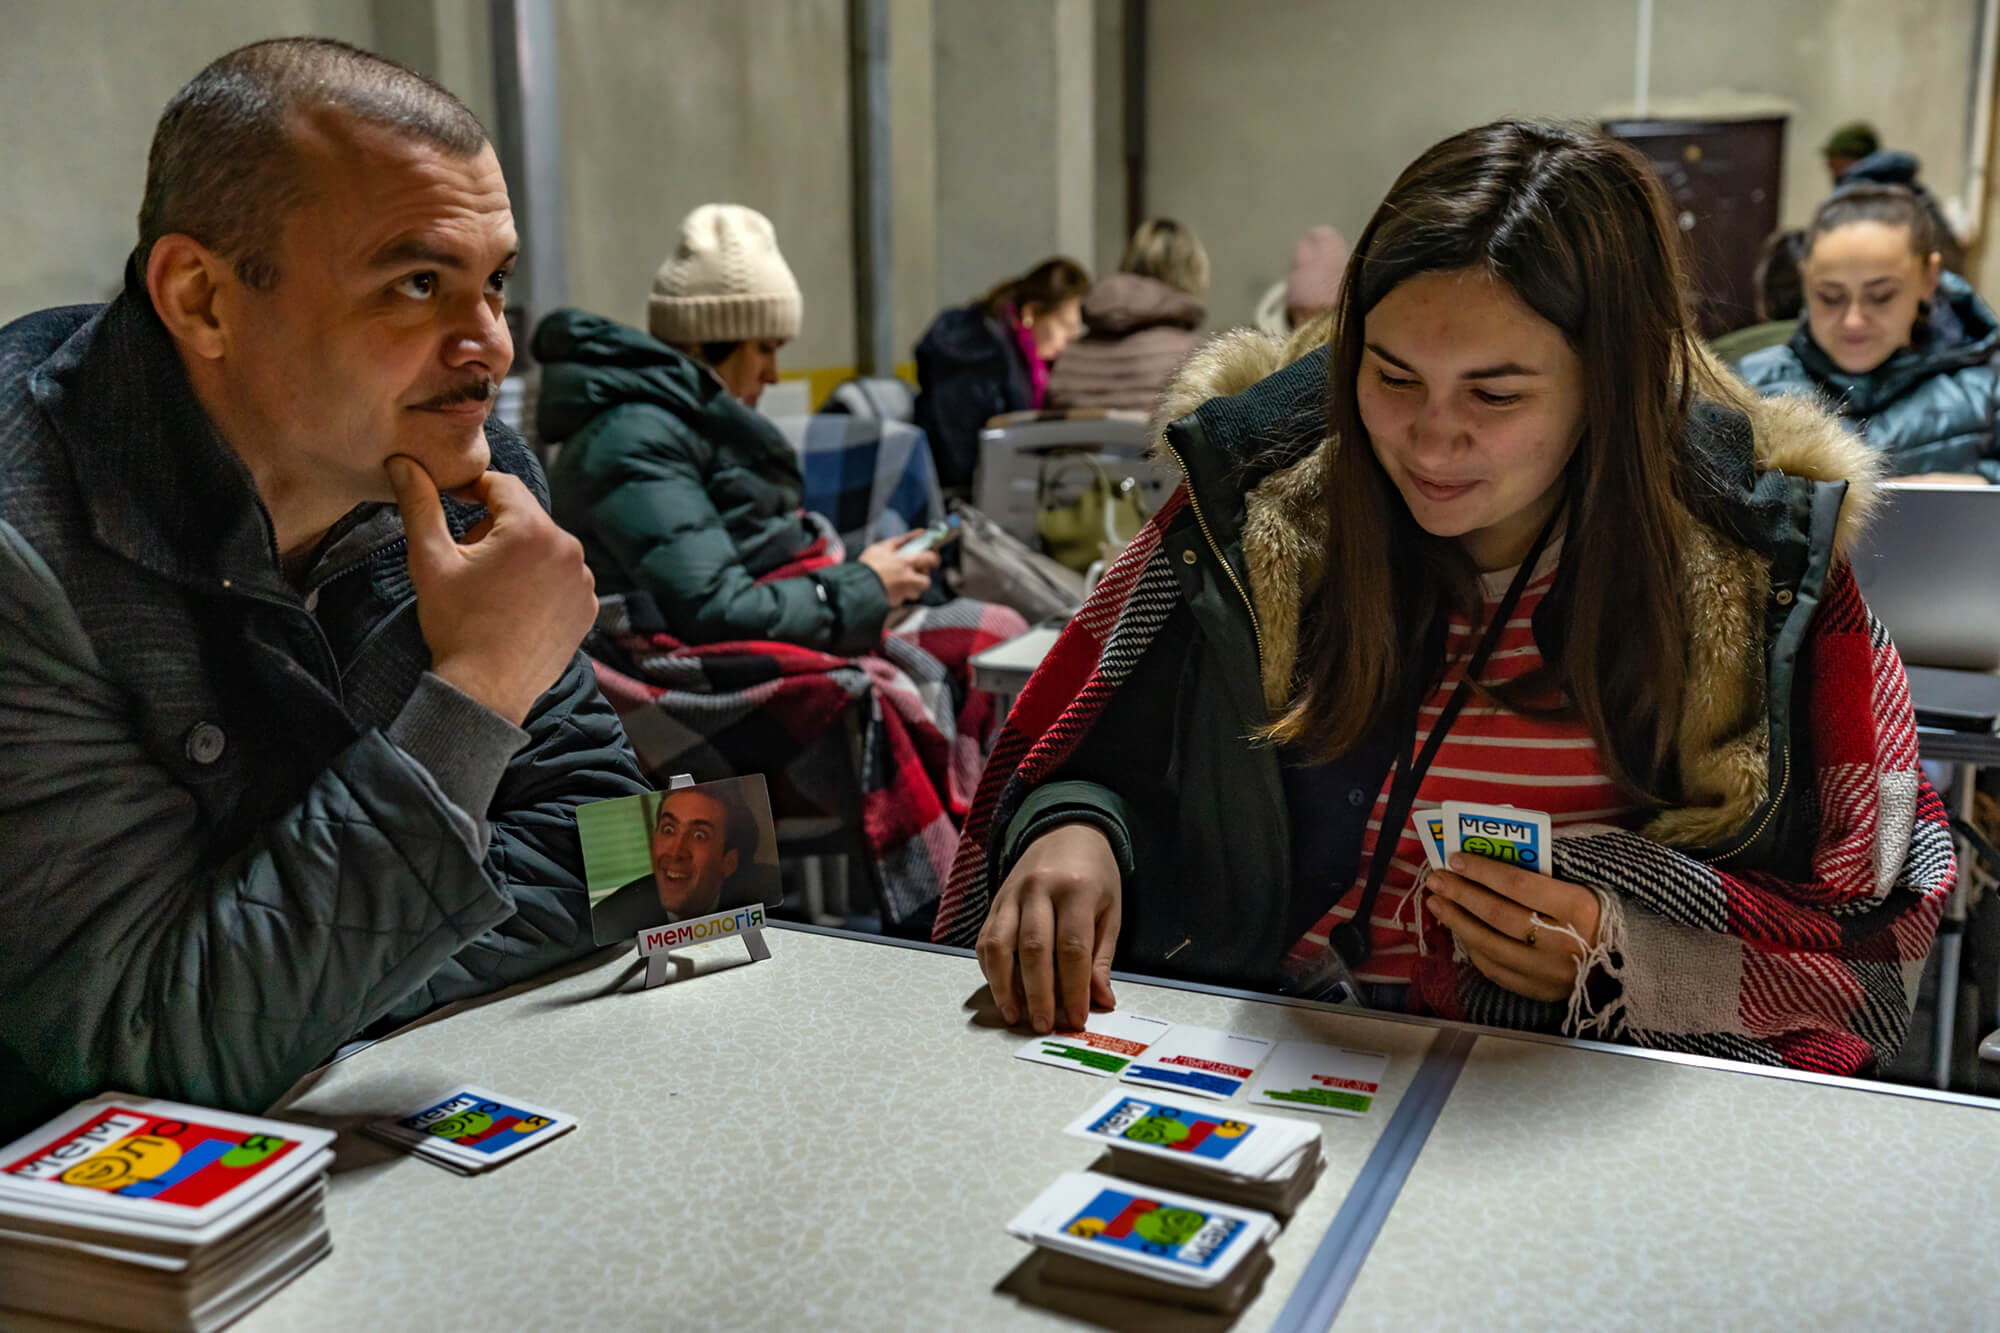 most staff member are working on laptops or phones, while a few who have jobs that can’t be done while sheltering in place—such as drivers—pass the time by playing cards.